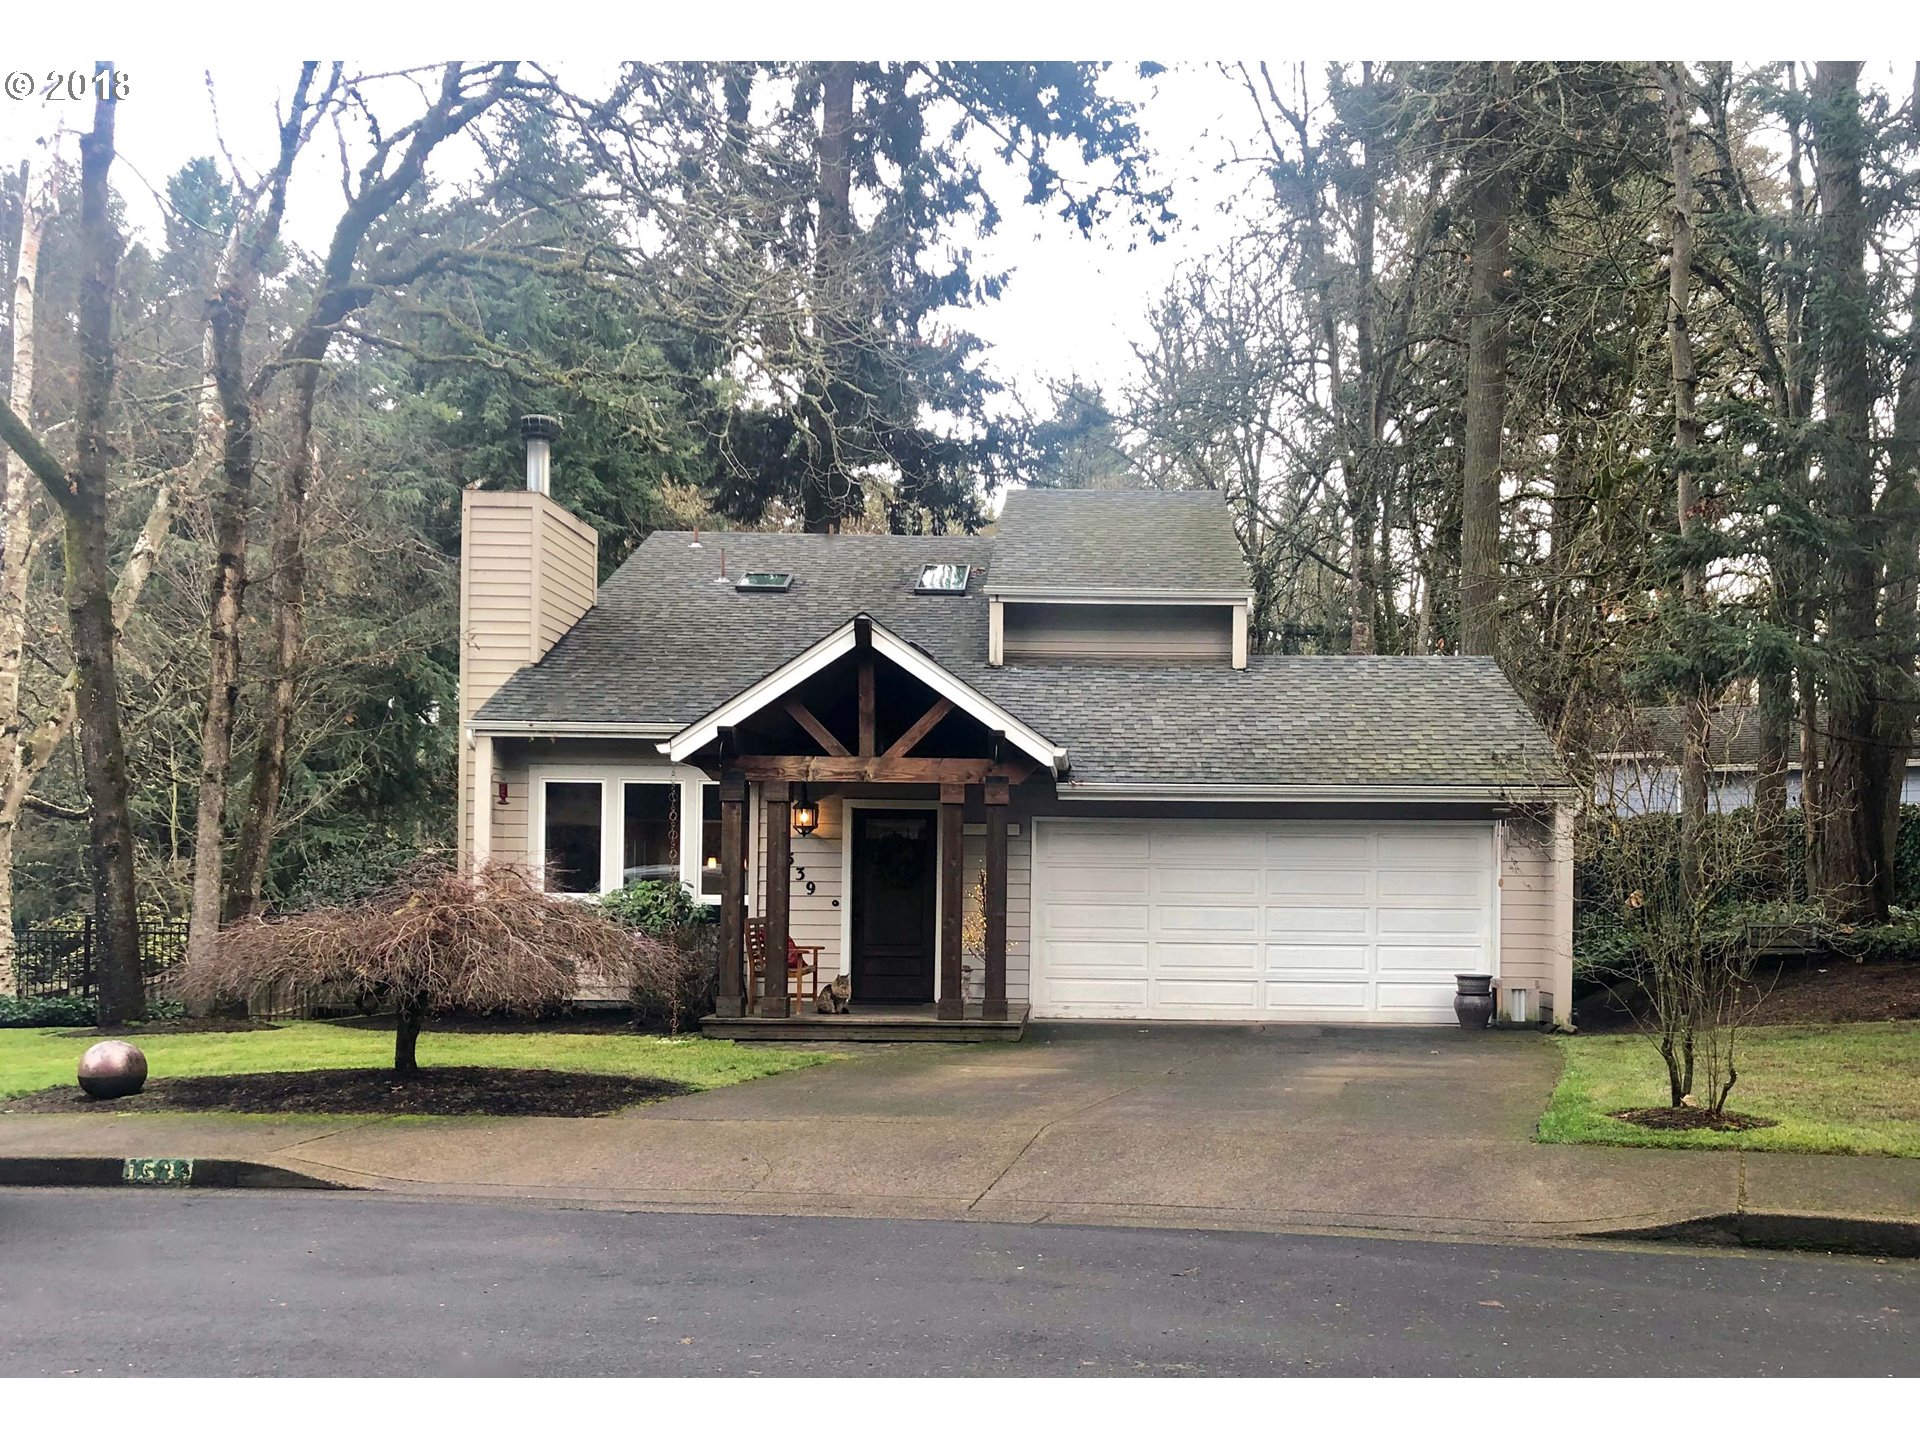 1539 Happy Ln Eugene Home Listings - Galand Haas Real Estate